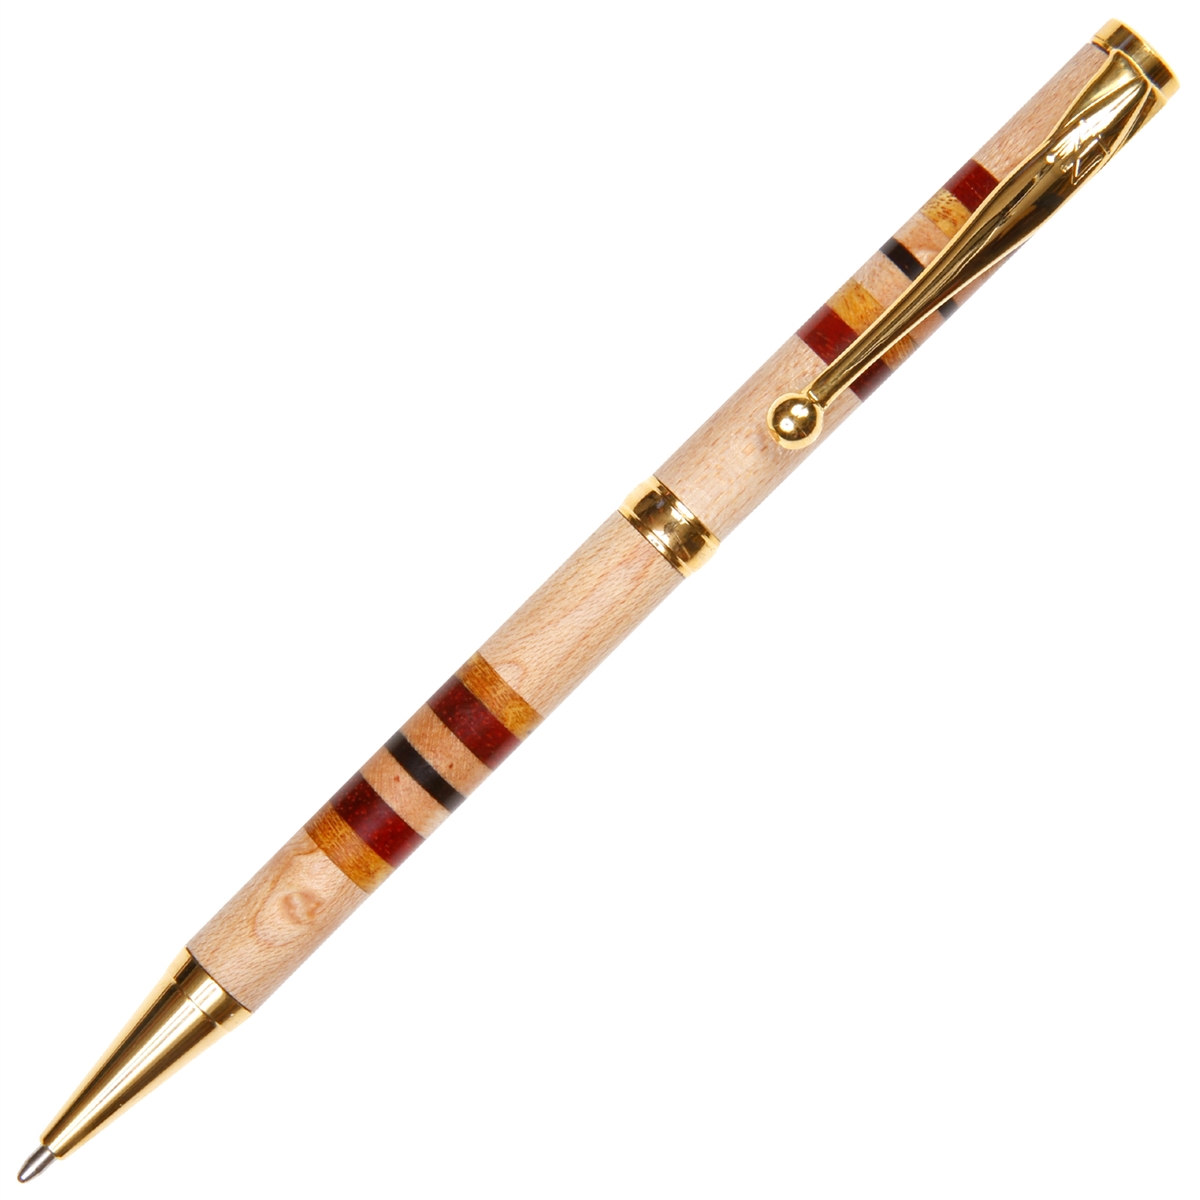 Slimline Twist Pen - Maple with Yellowheart, Red Heart and Ebony Inlays